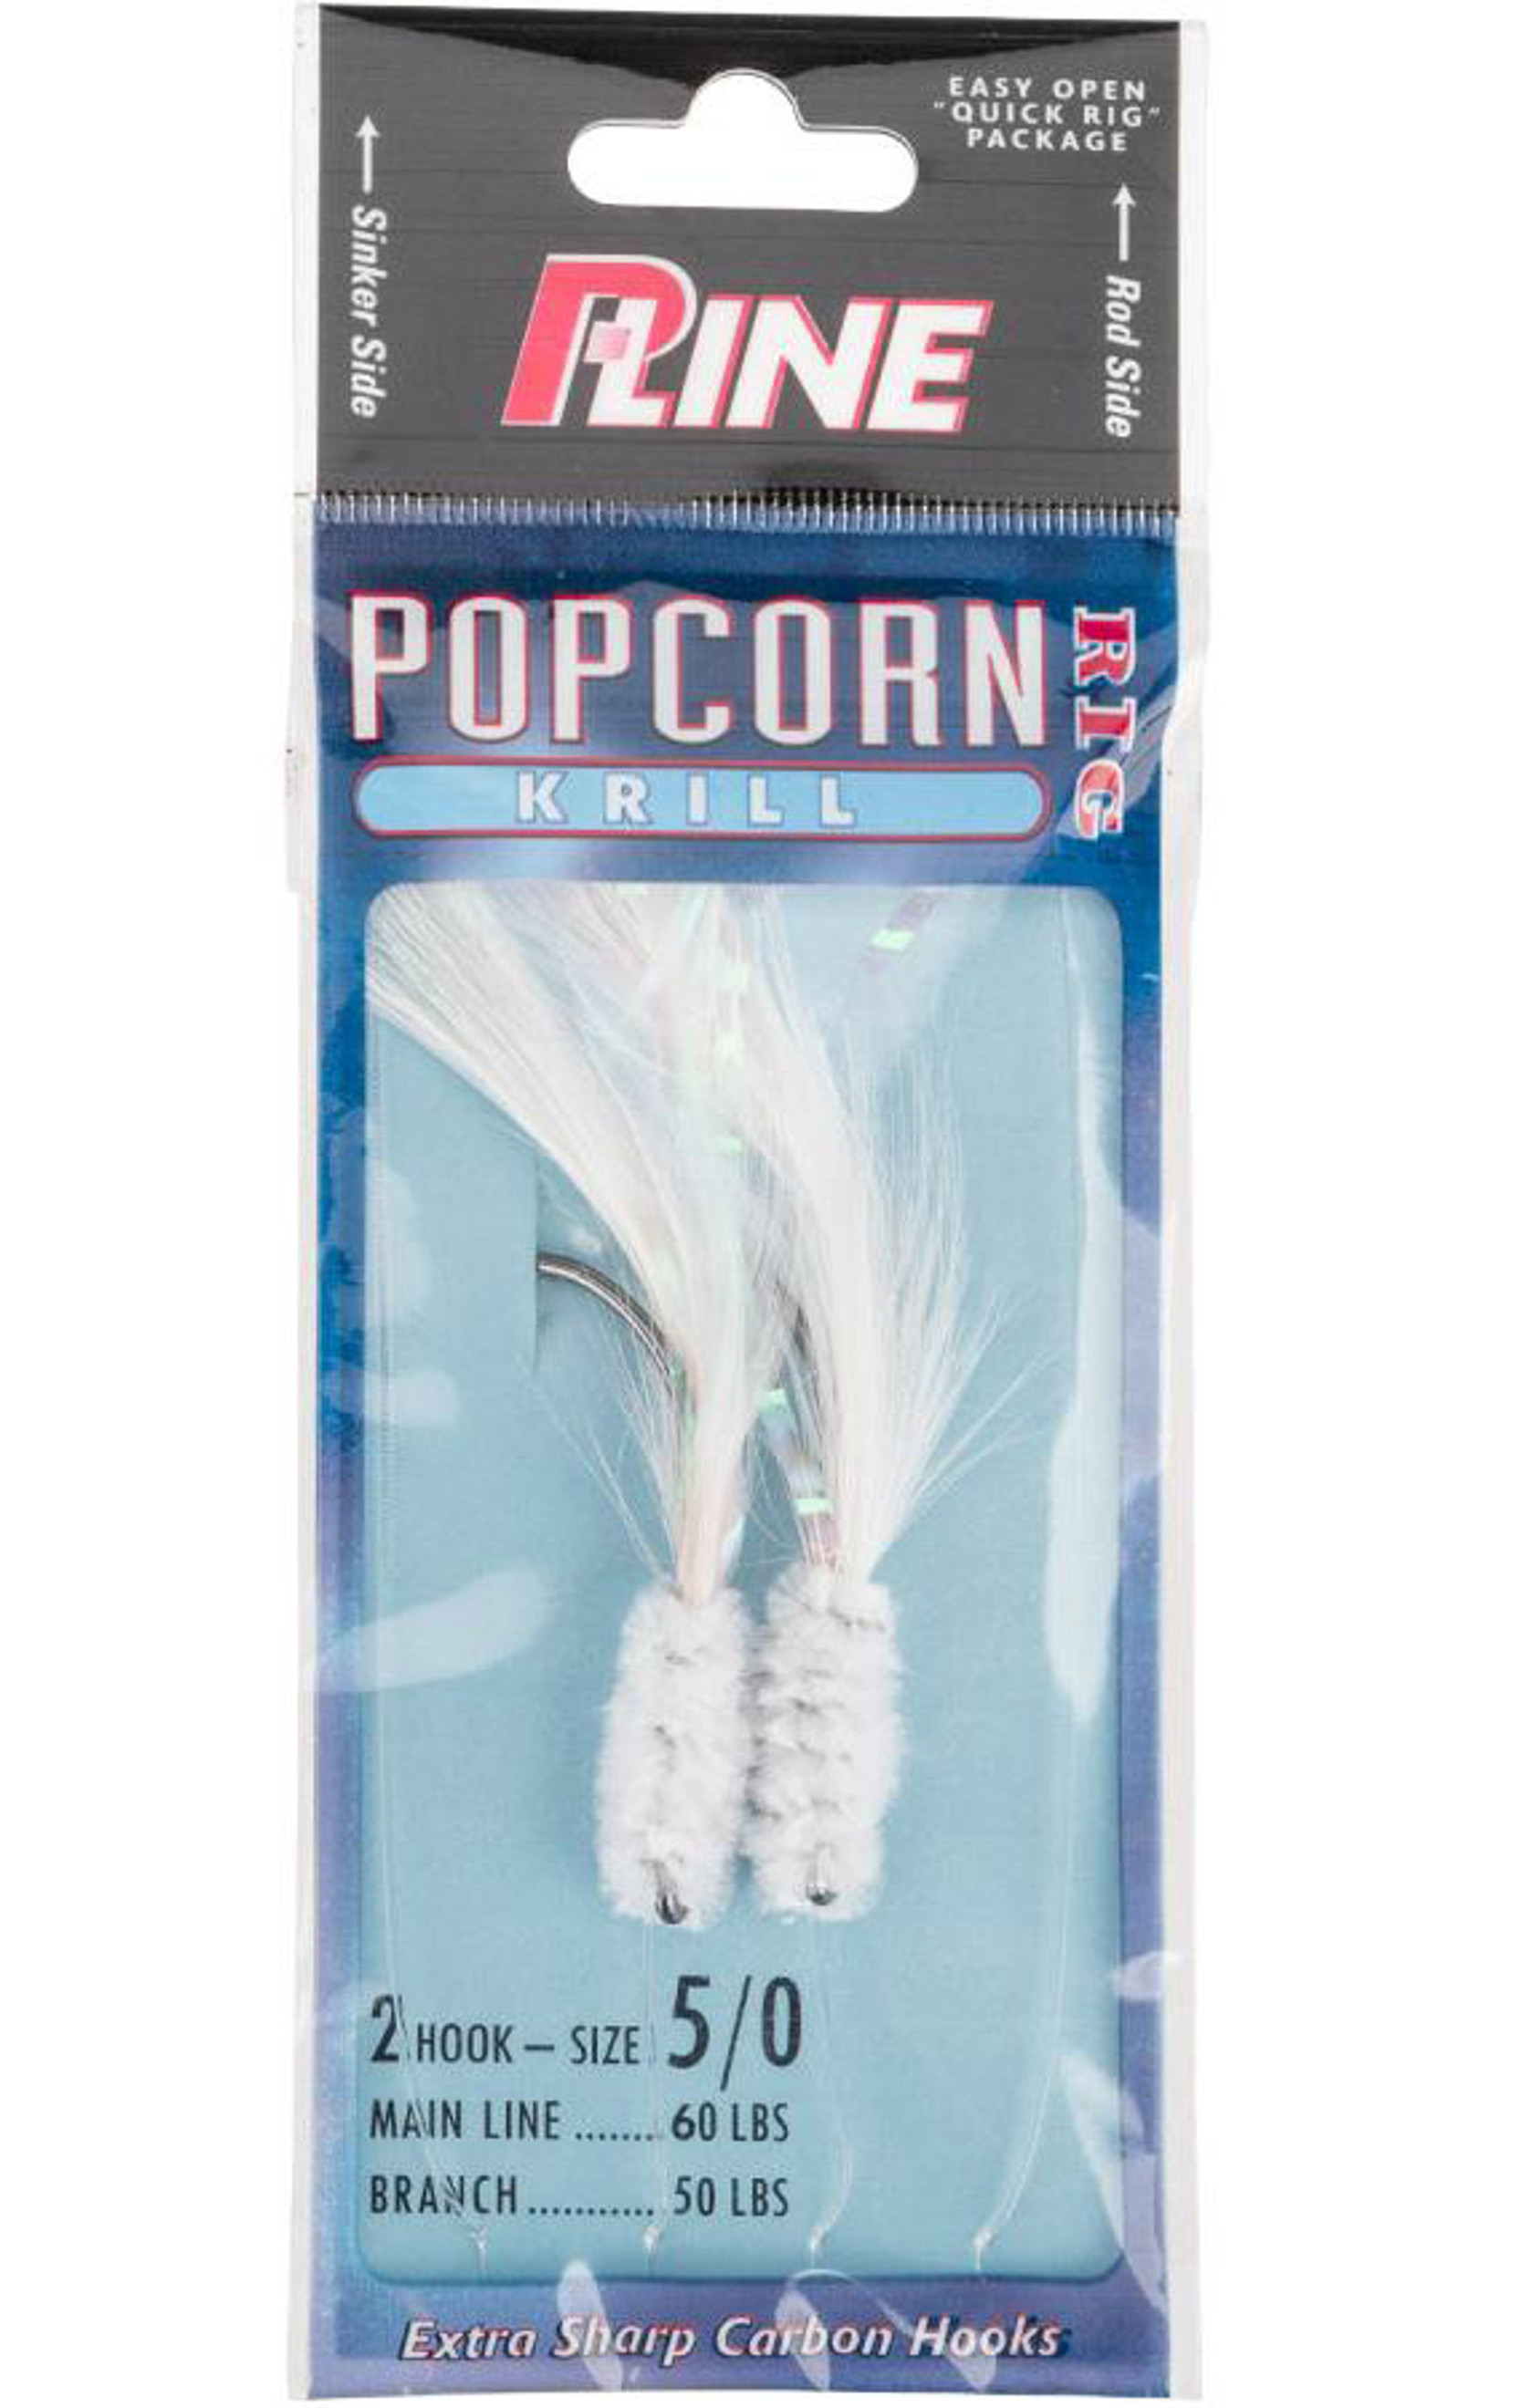 P-Line Popcorn Krill 2 Hook Fishing Rig (Color: White / 5/0)